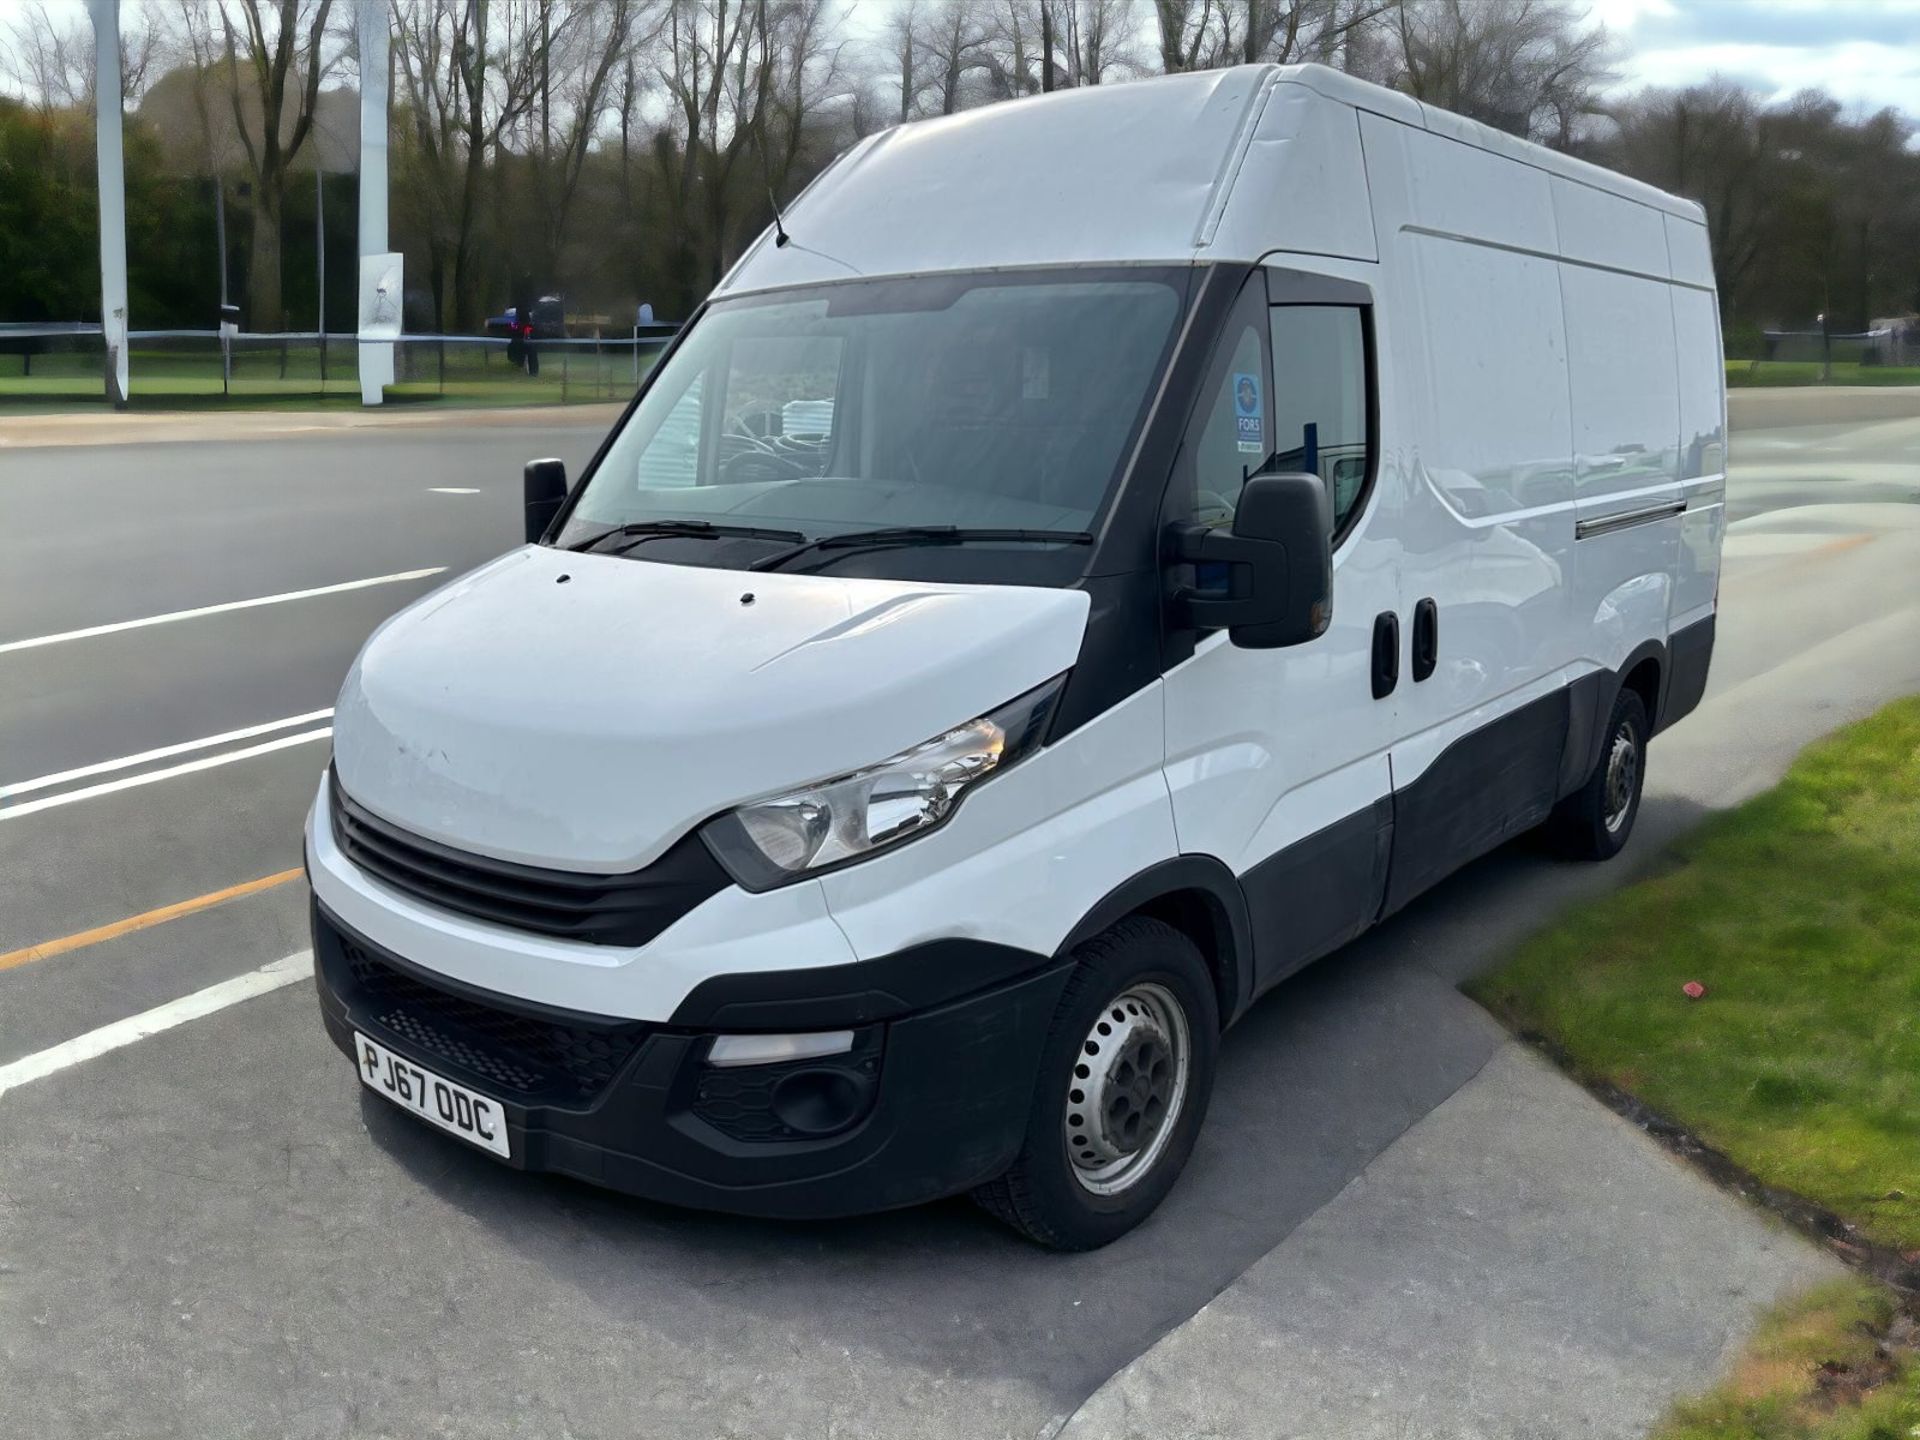 2017-67 REG IVECO DAILY 35S -HPI CLEAR - READY FOR WORK! - Image 2 of 12